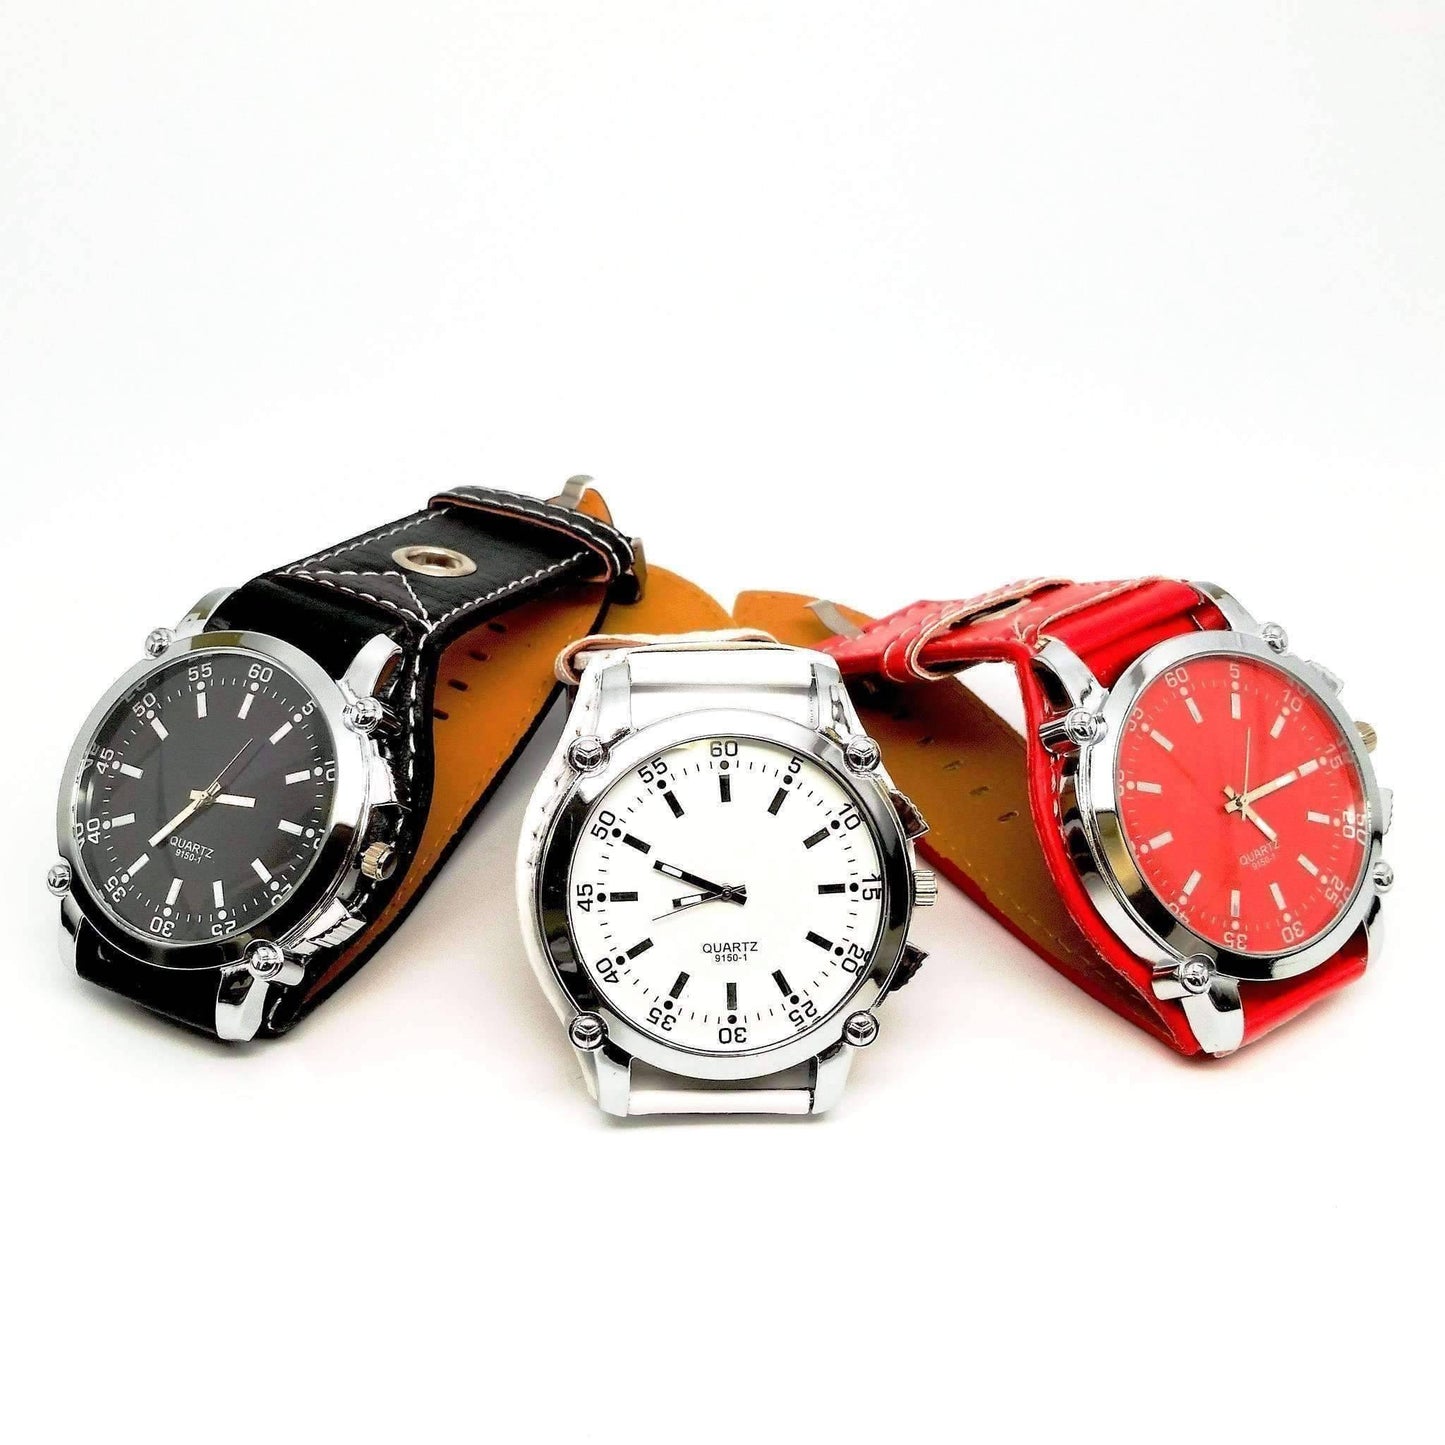 Feshionn IOBI Watches "Big Time" Over-sized Wrist Watch with Wide Leather Band - 3 Colors to Choose